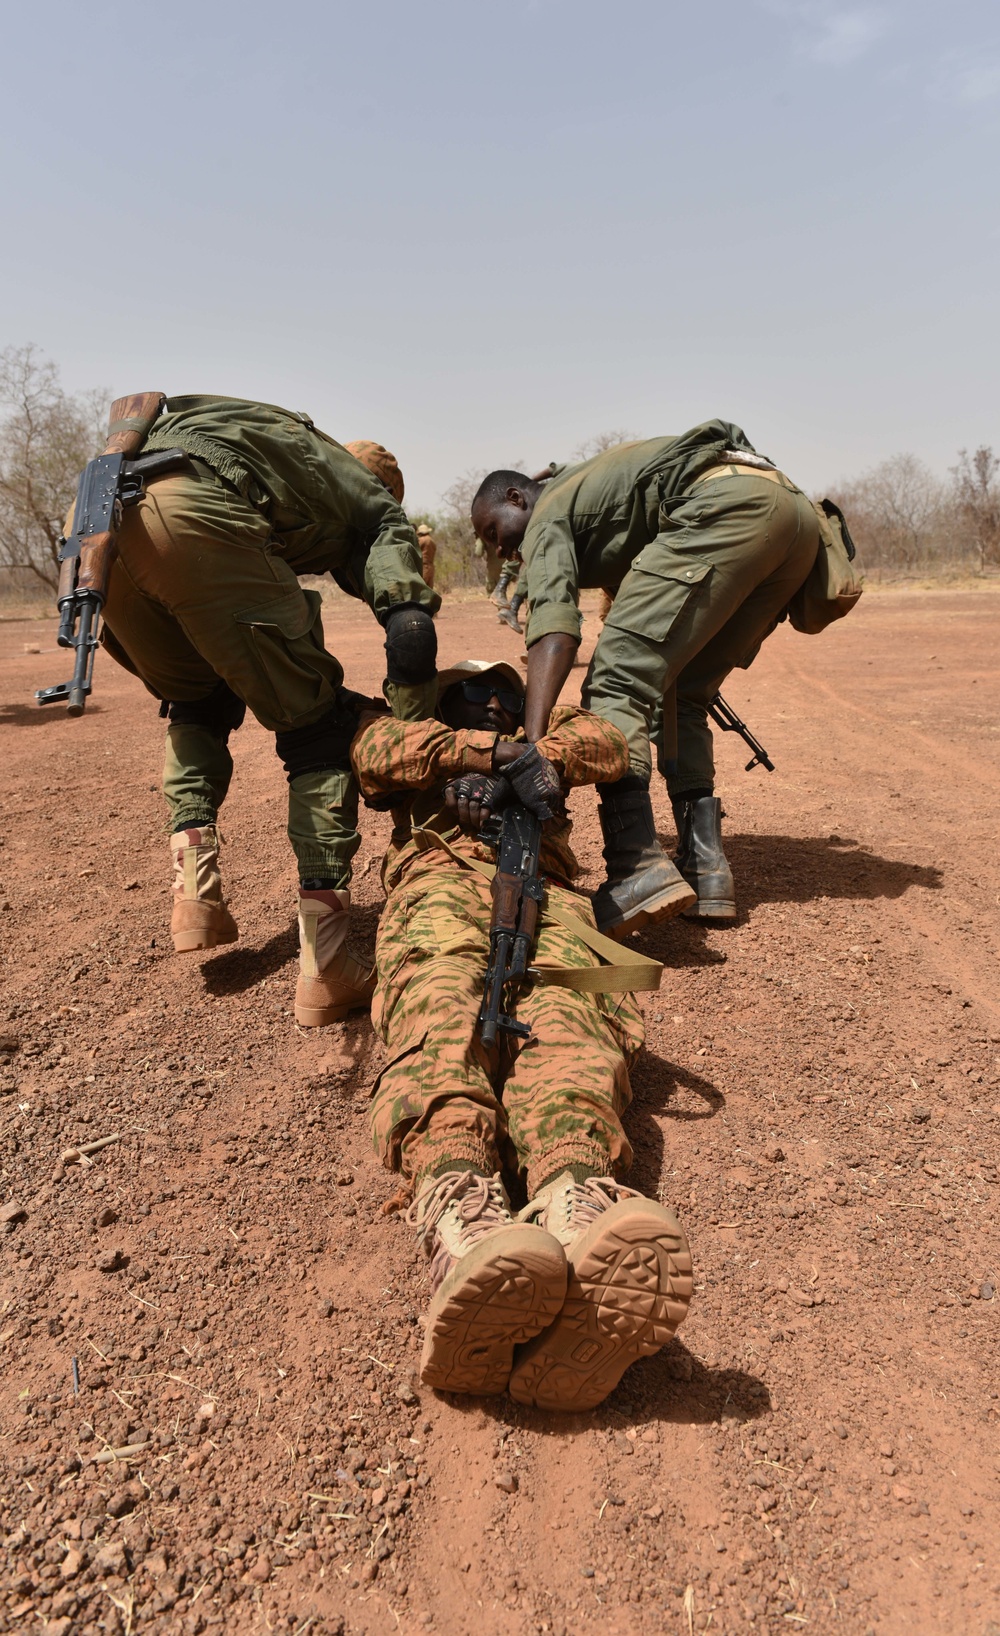 Casualty care exercise during Flintlock 2017 in Burkina Faso